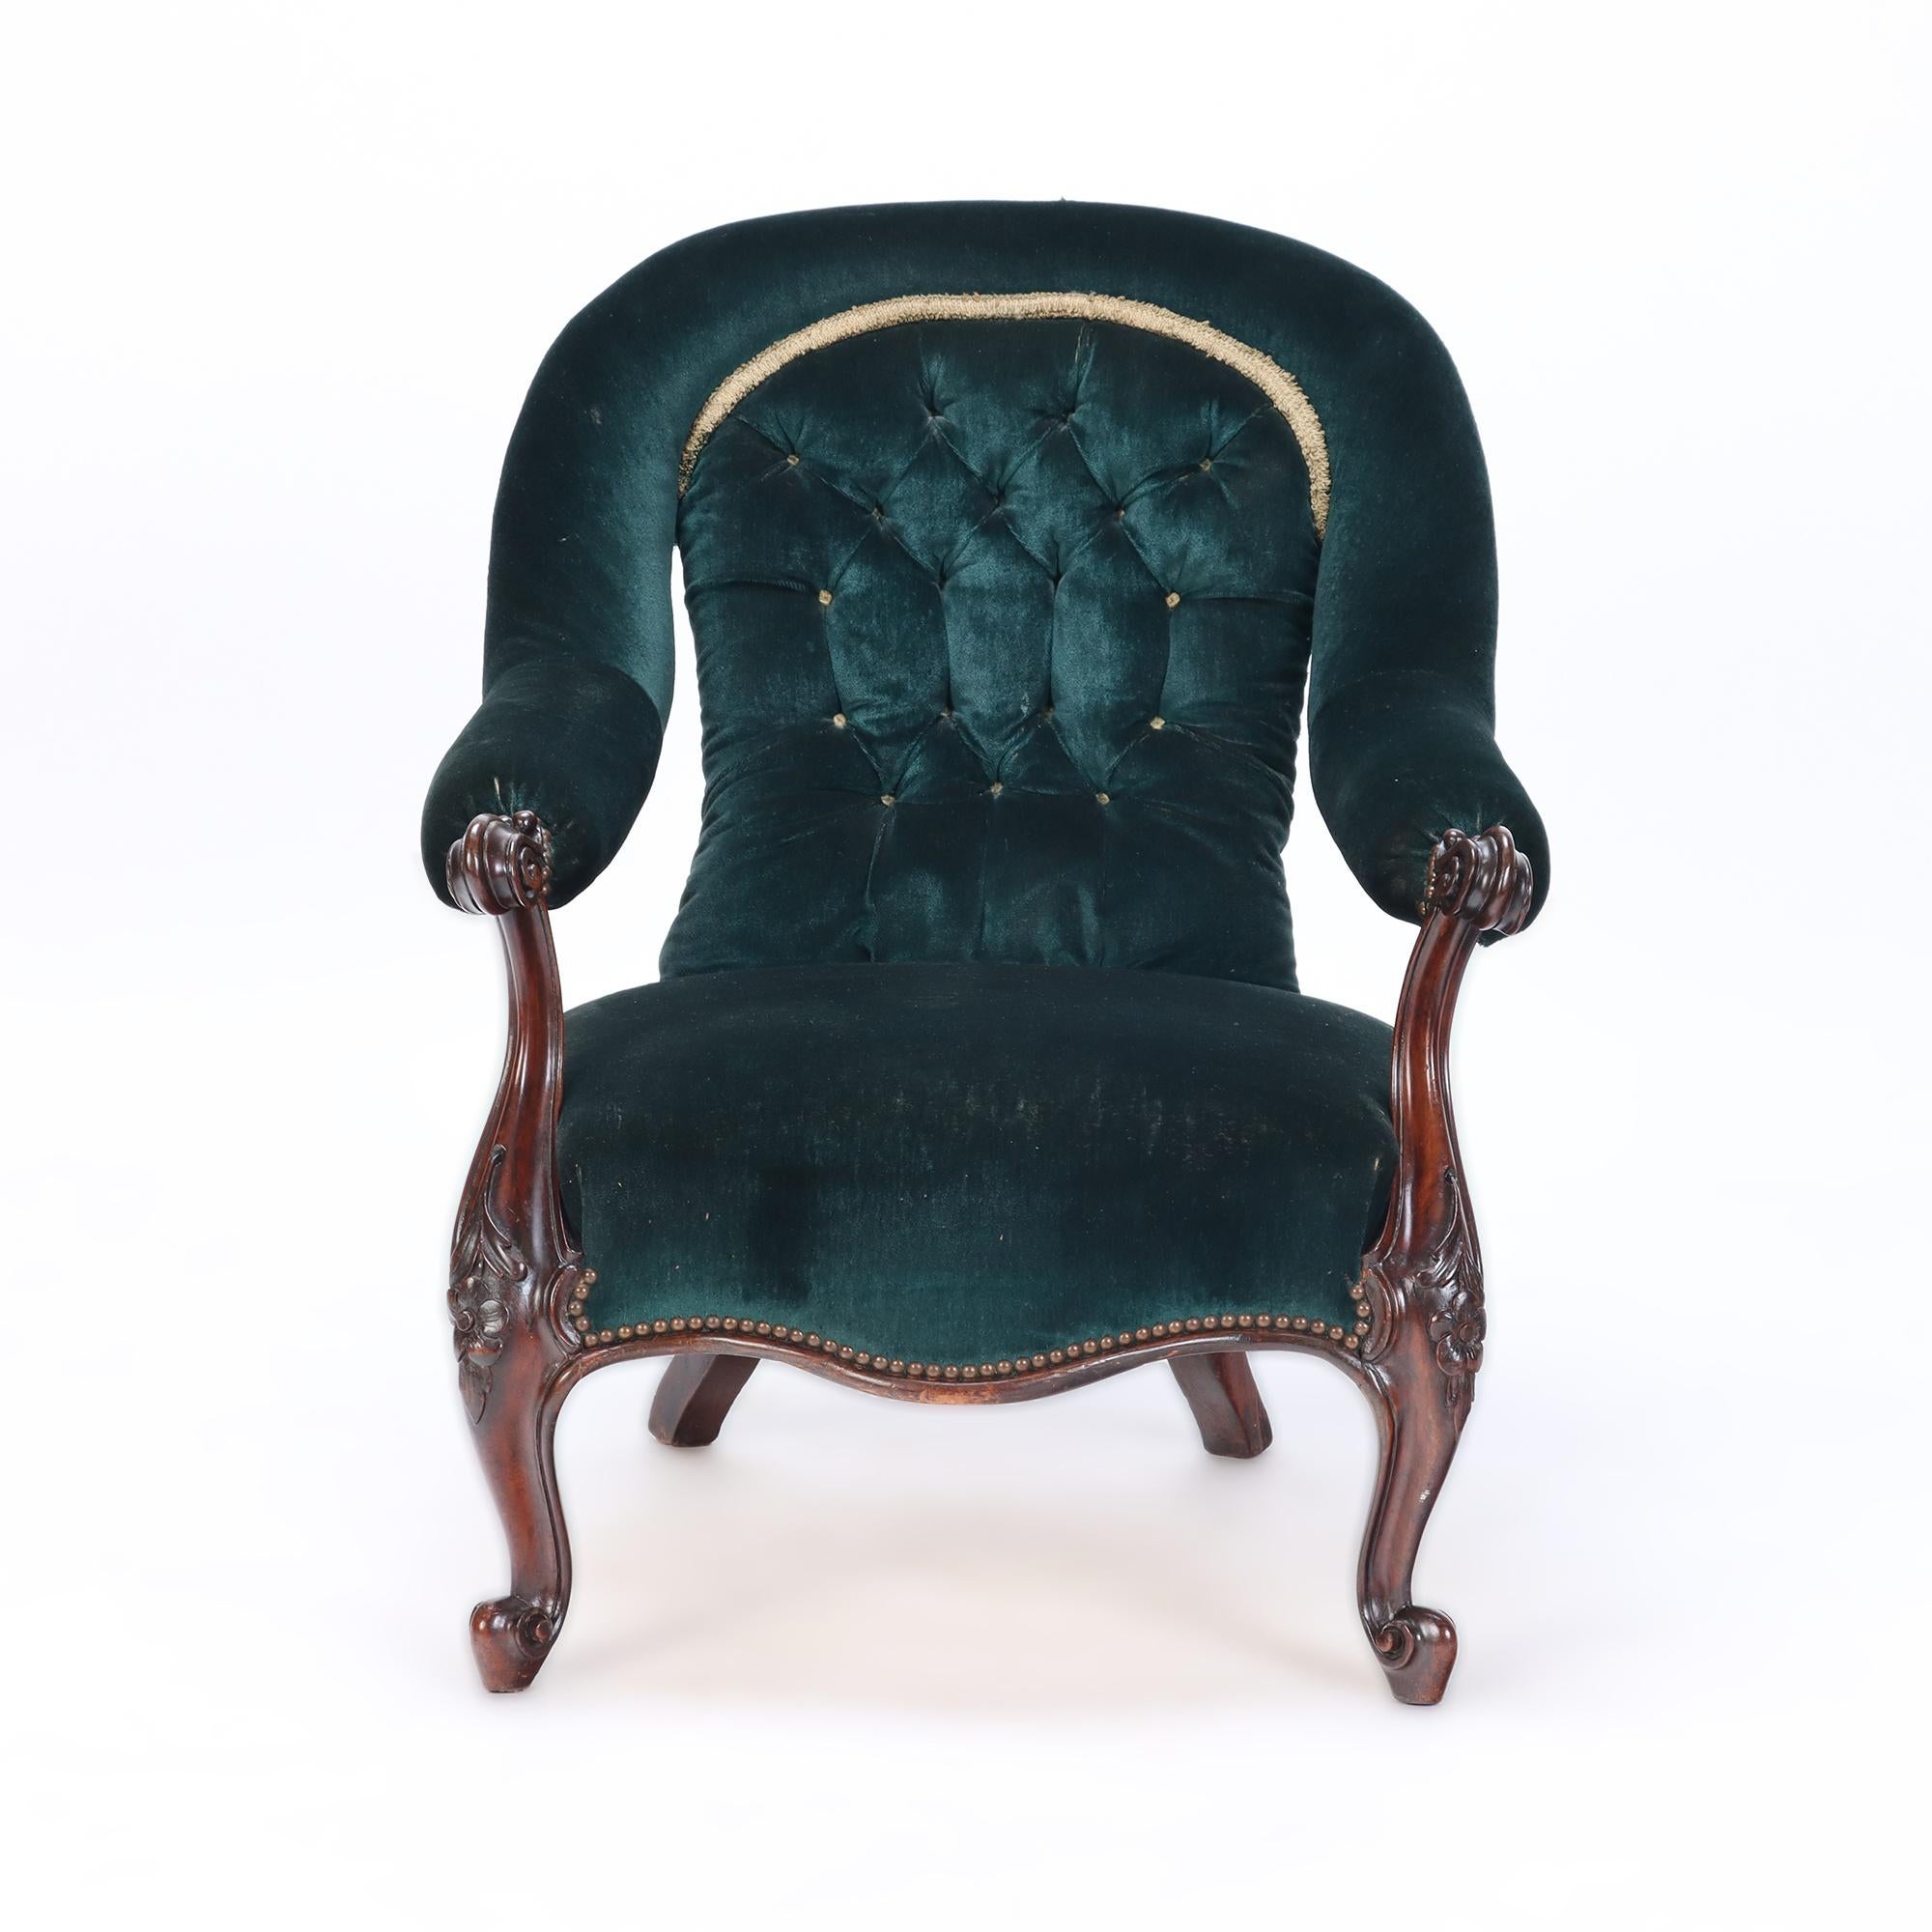 An imposing velvet upholstered library armchair with continuous arm, 19th C. The armchair would be incredible upholstered in leather.